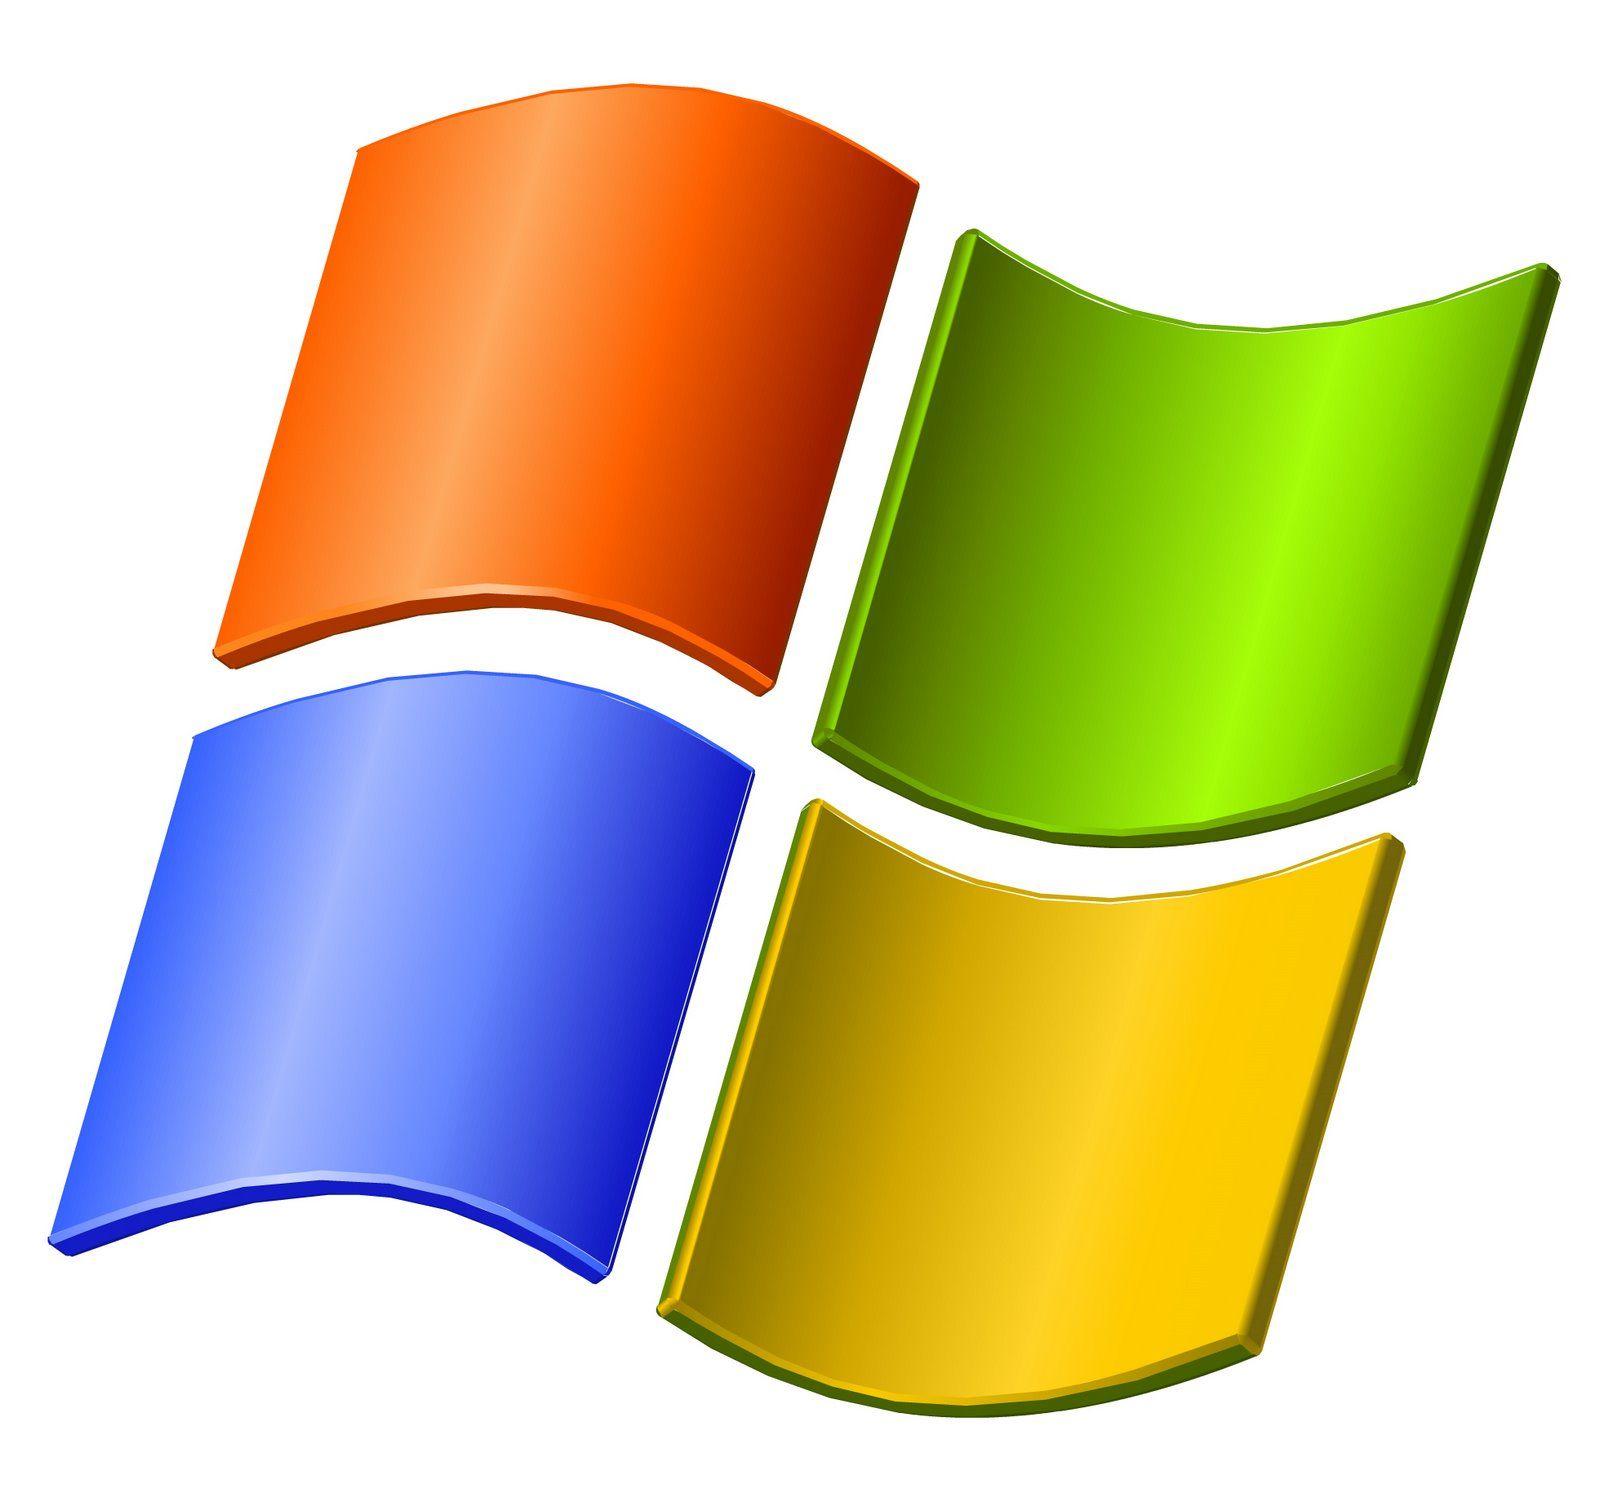 Old Microsoft Logo - Microsoft Offers Bounty to Hackers for Hacking Windows 8